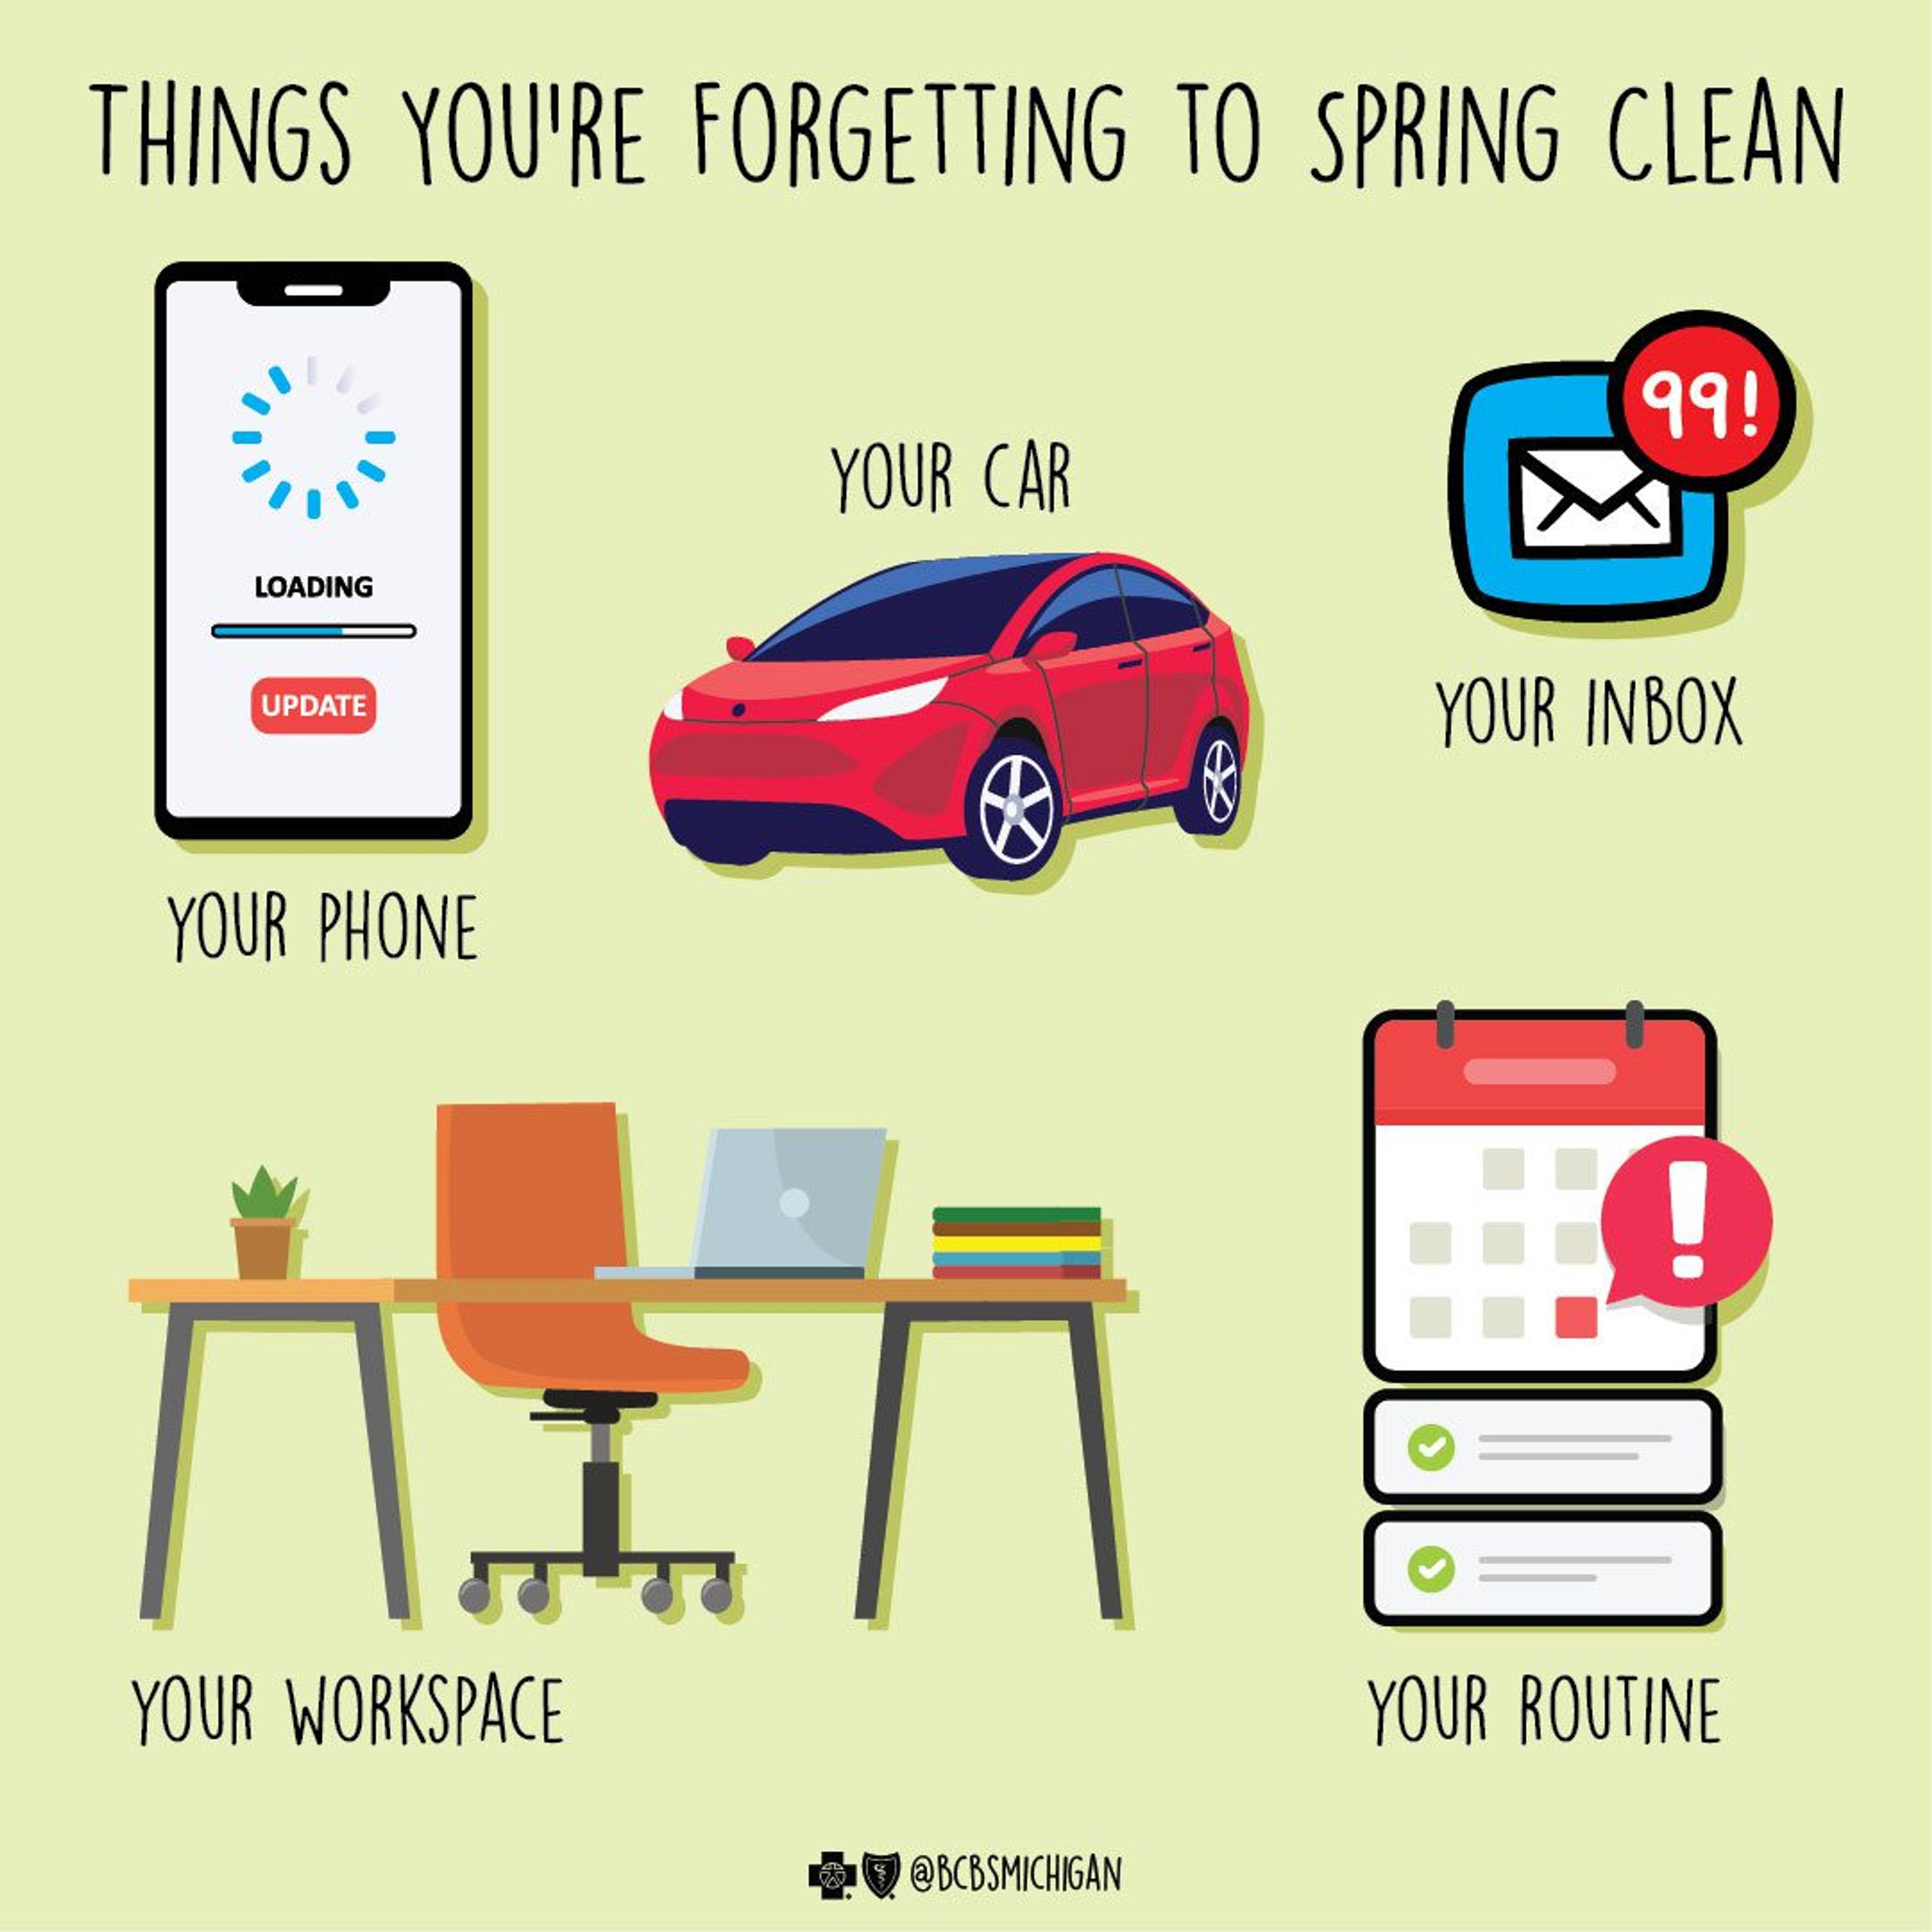 6 Things You're Forgetting to Spring Clean